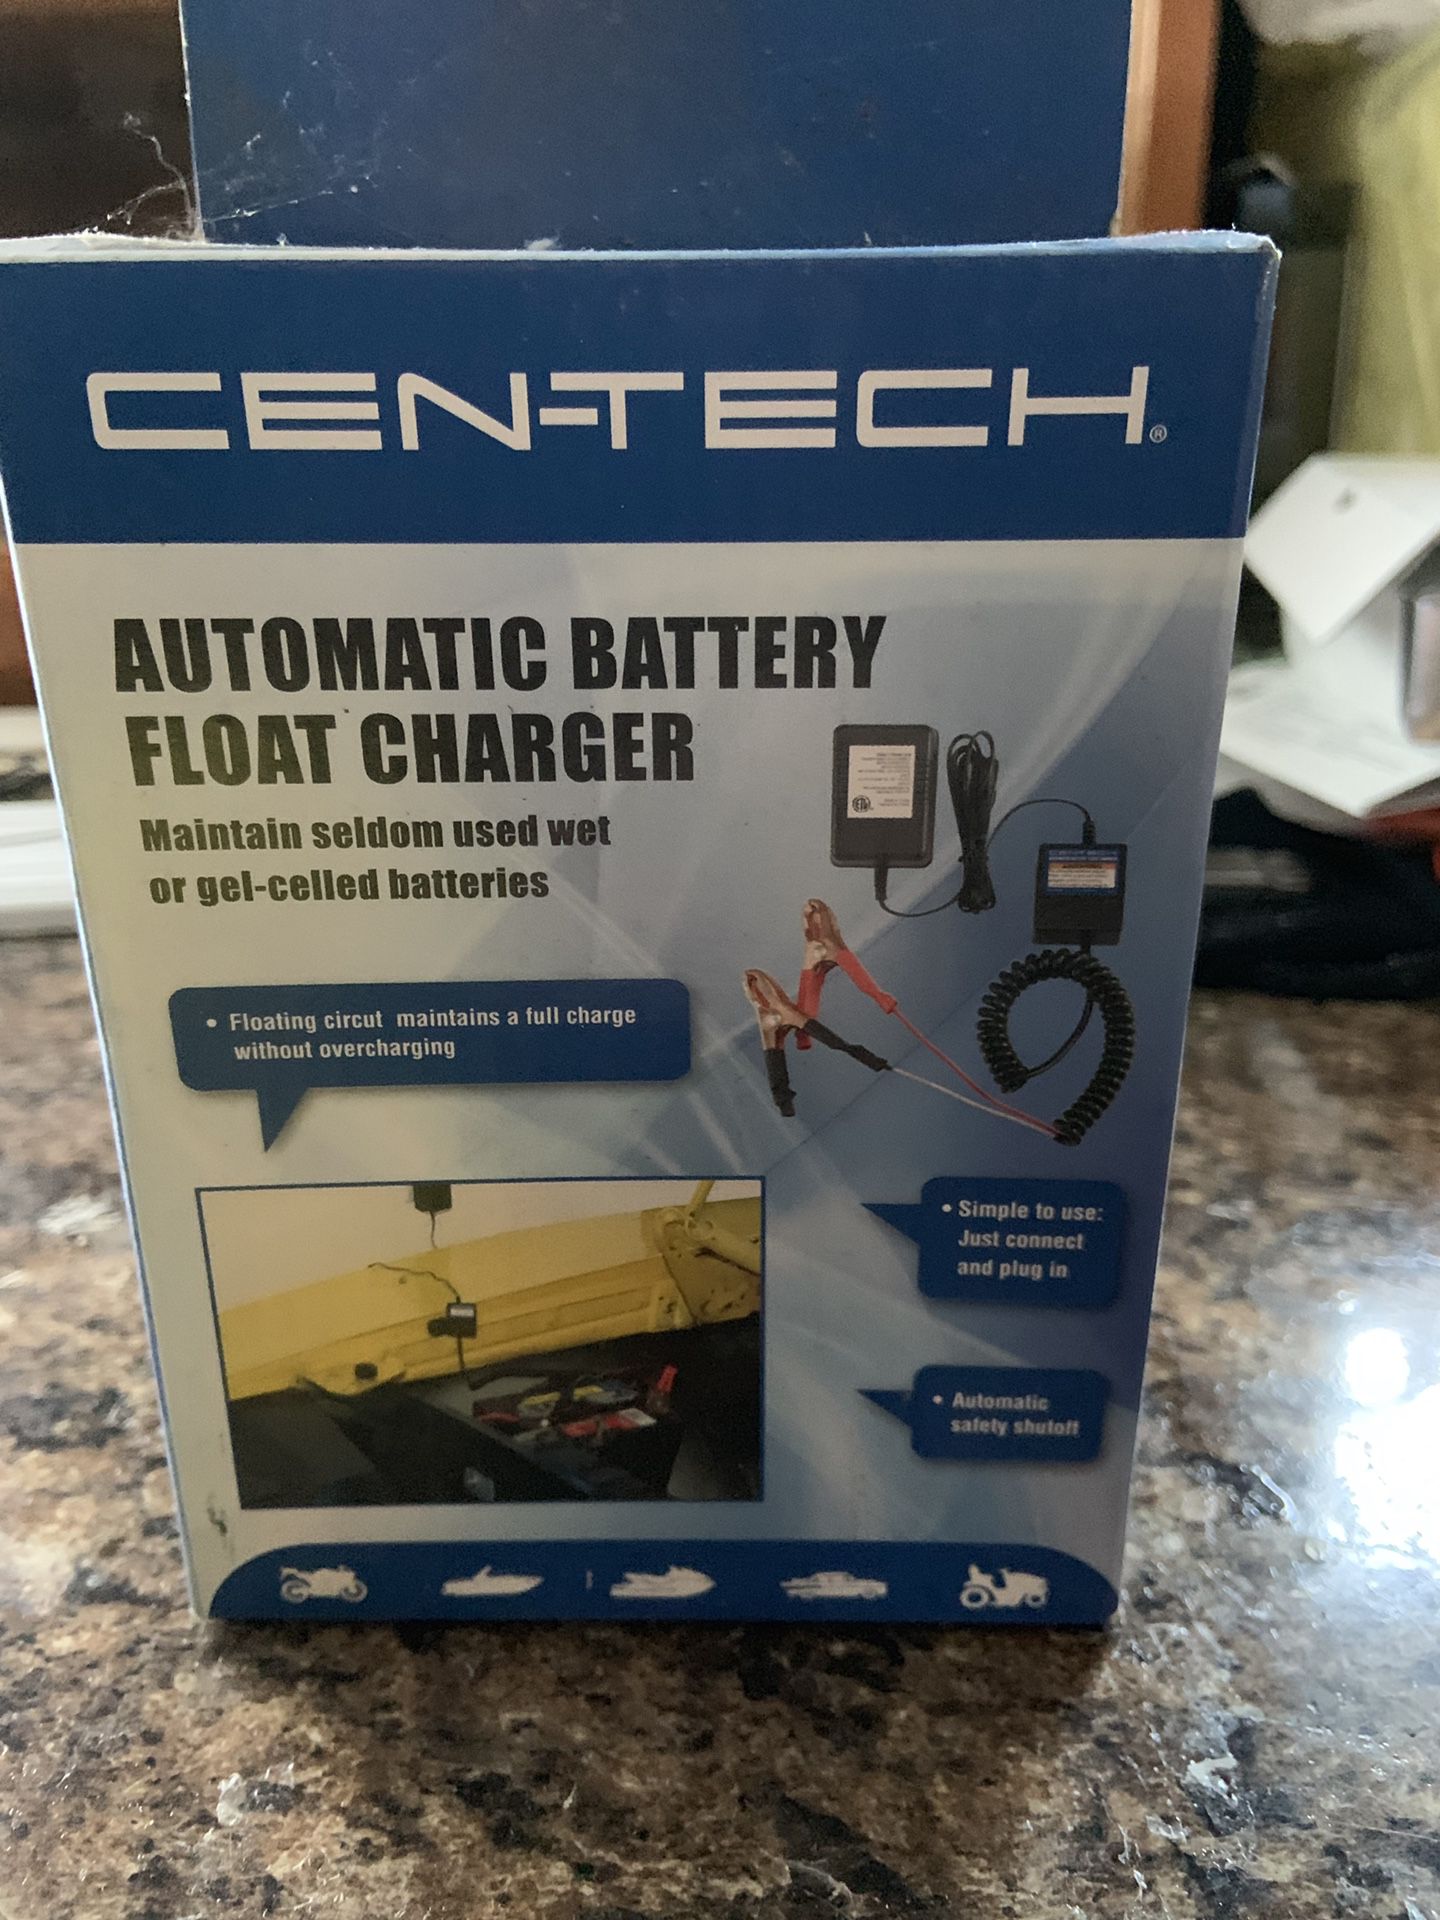 New in box Centech automatic battery float charger